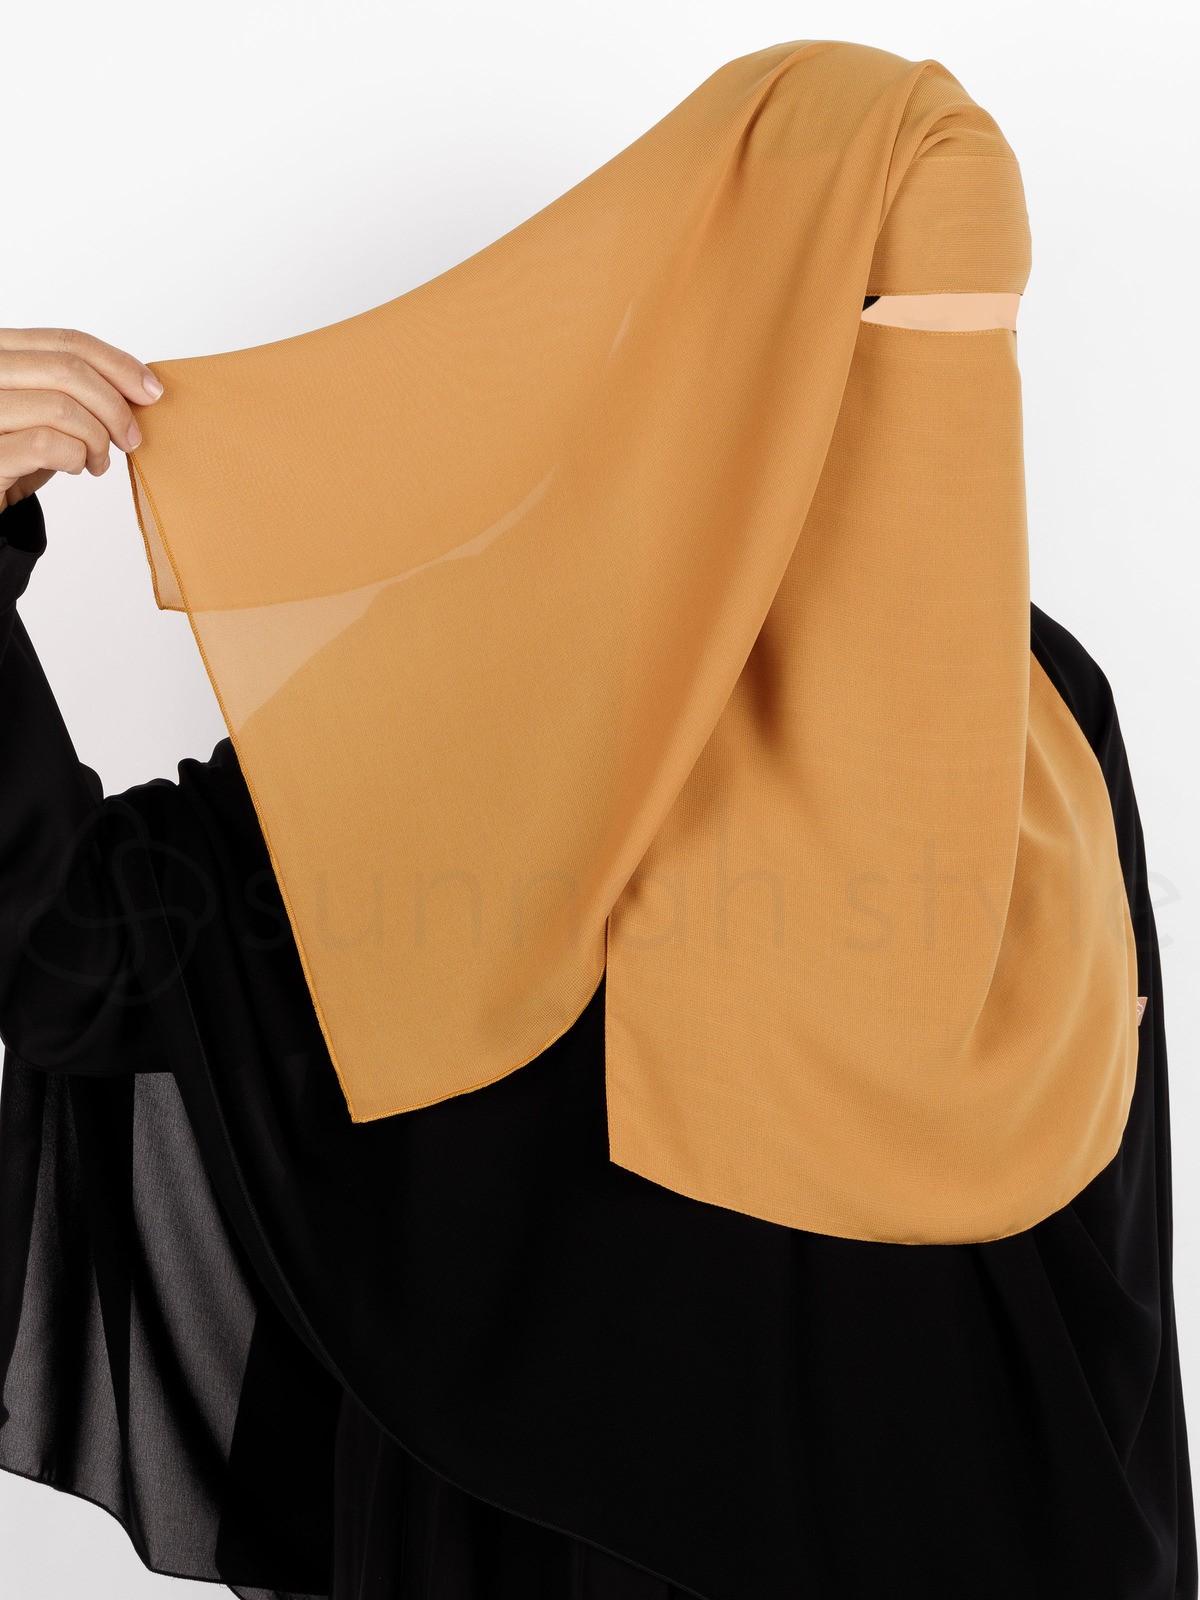 Sunnah Style - Two Layer Niqab (Honey)